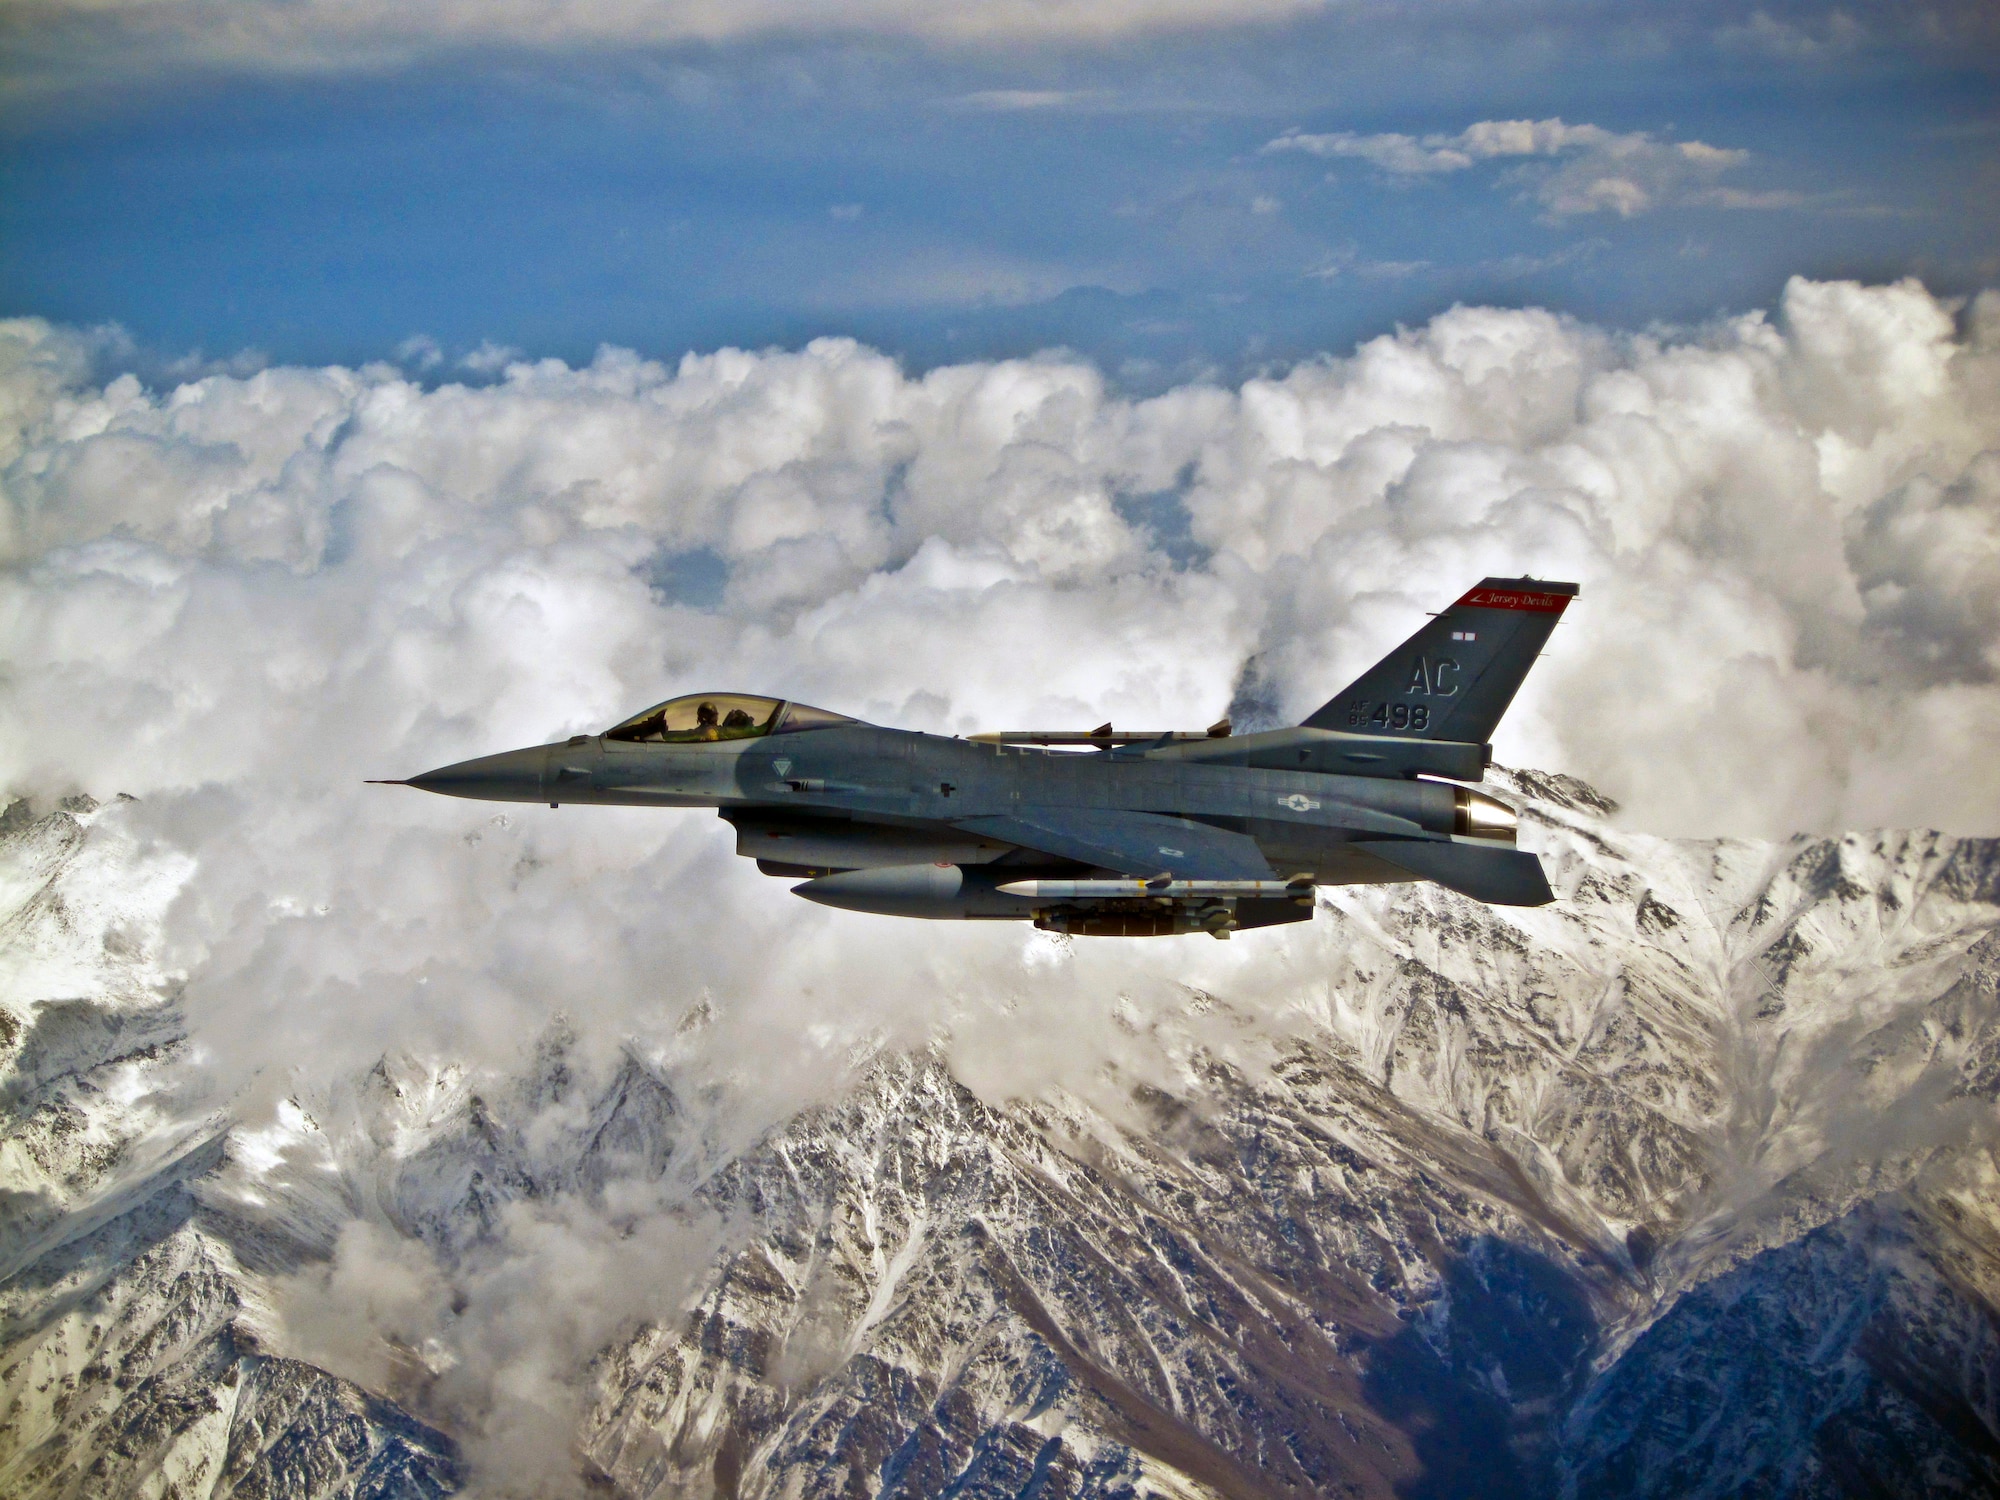 An F-16C Fighting Falcon with the 177th Fighter Wing, New Jersey Air National Guard, on a mission over Afghanistan on Oct. 23, 2011. (U.S. Air Force photo)